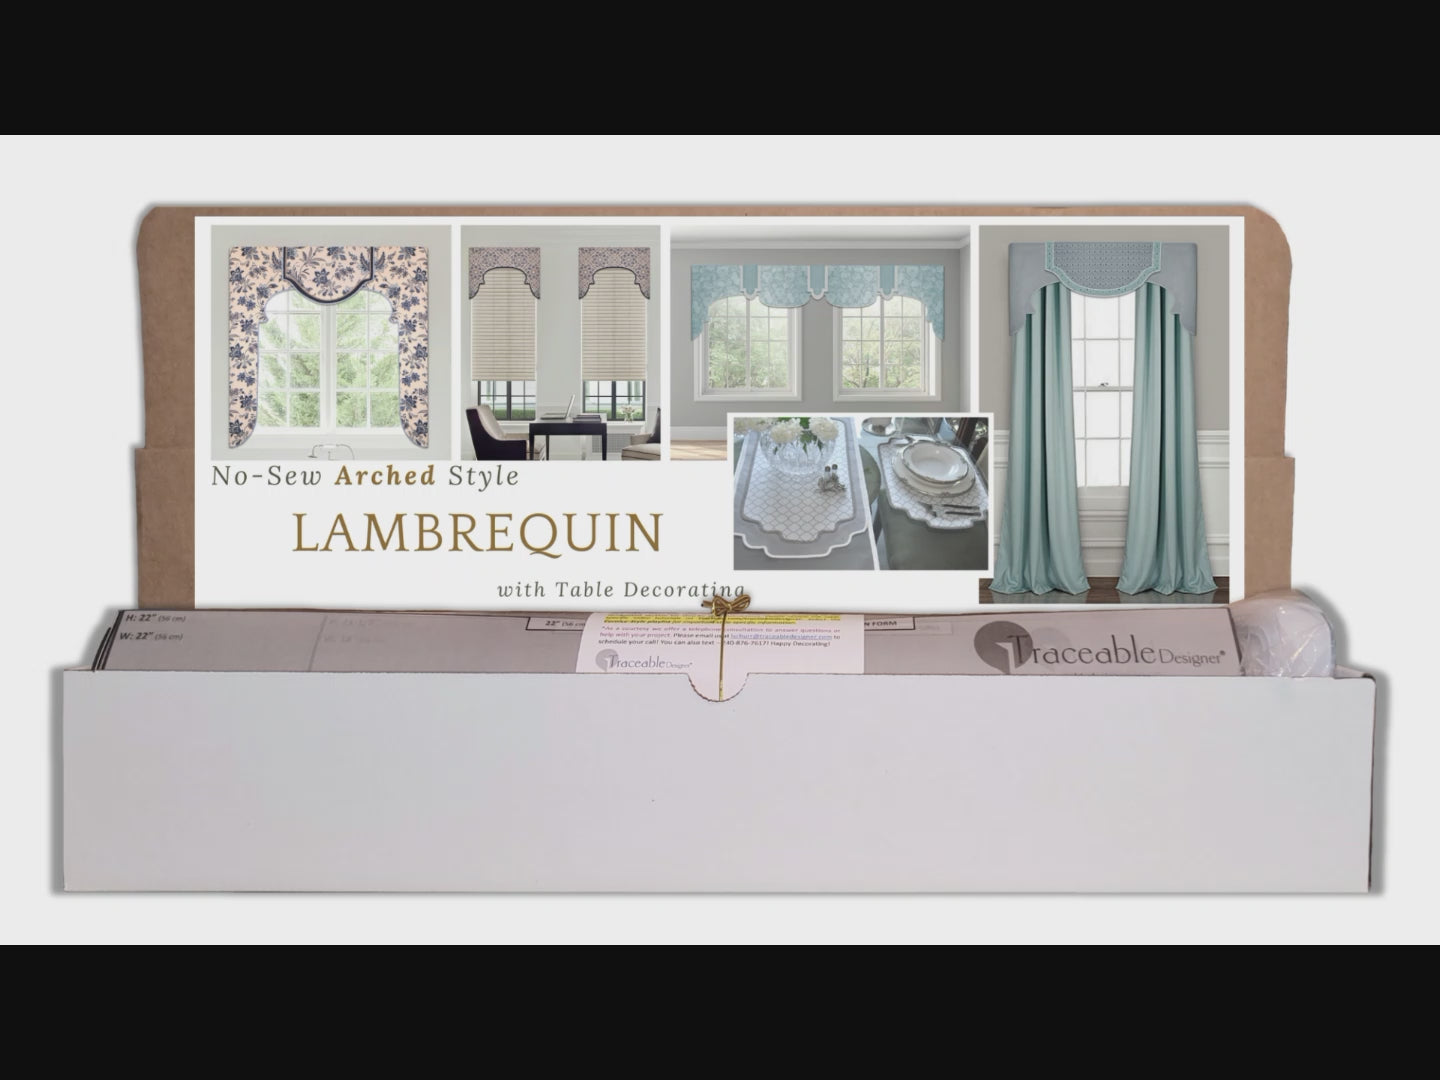 Traceable Designer arched style no-sew lambrequin valance kit, make custom cornice style lambrequin valance without sewing, trace, cut out & hang! Fit all window sizes.